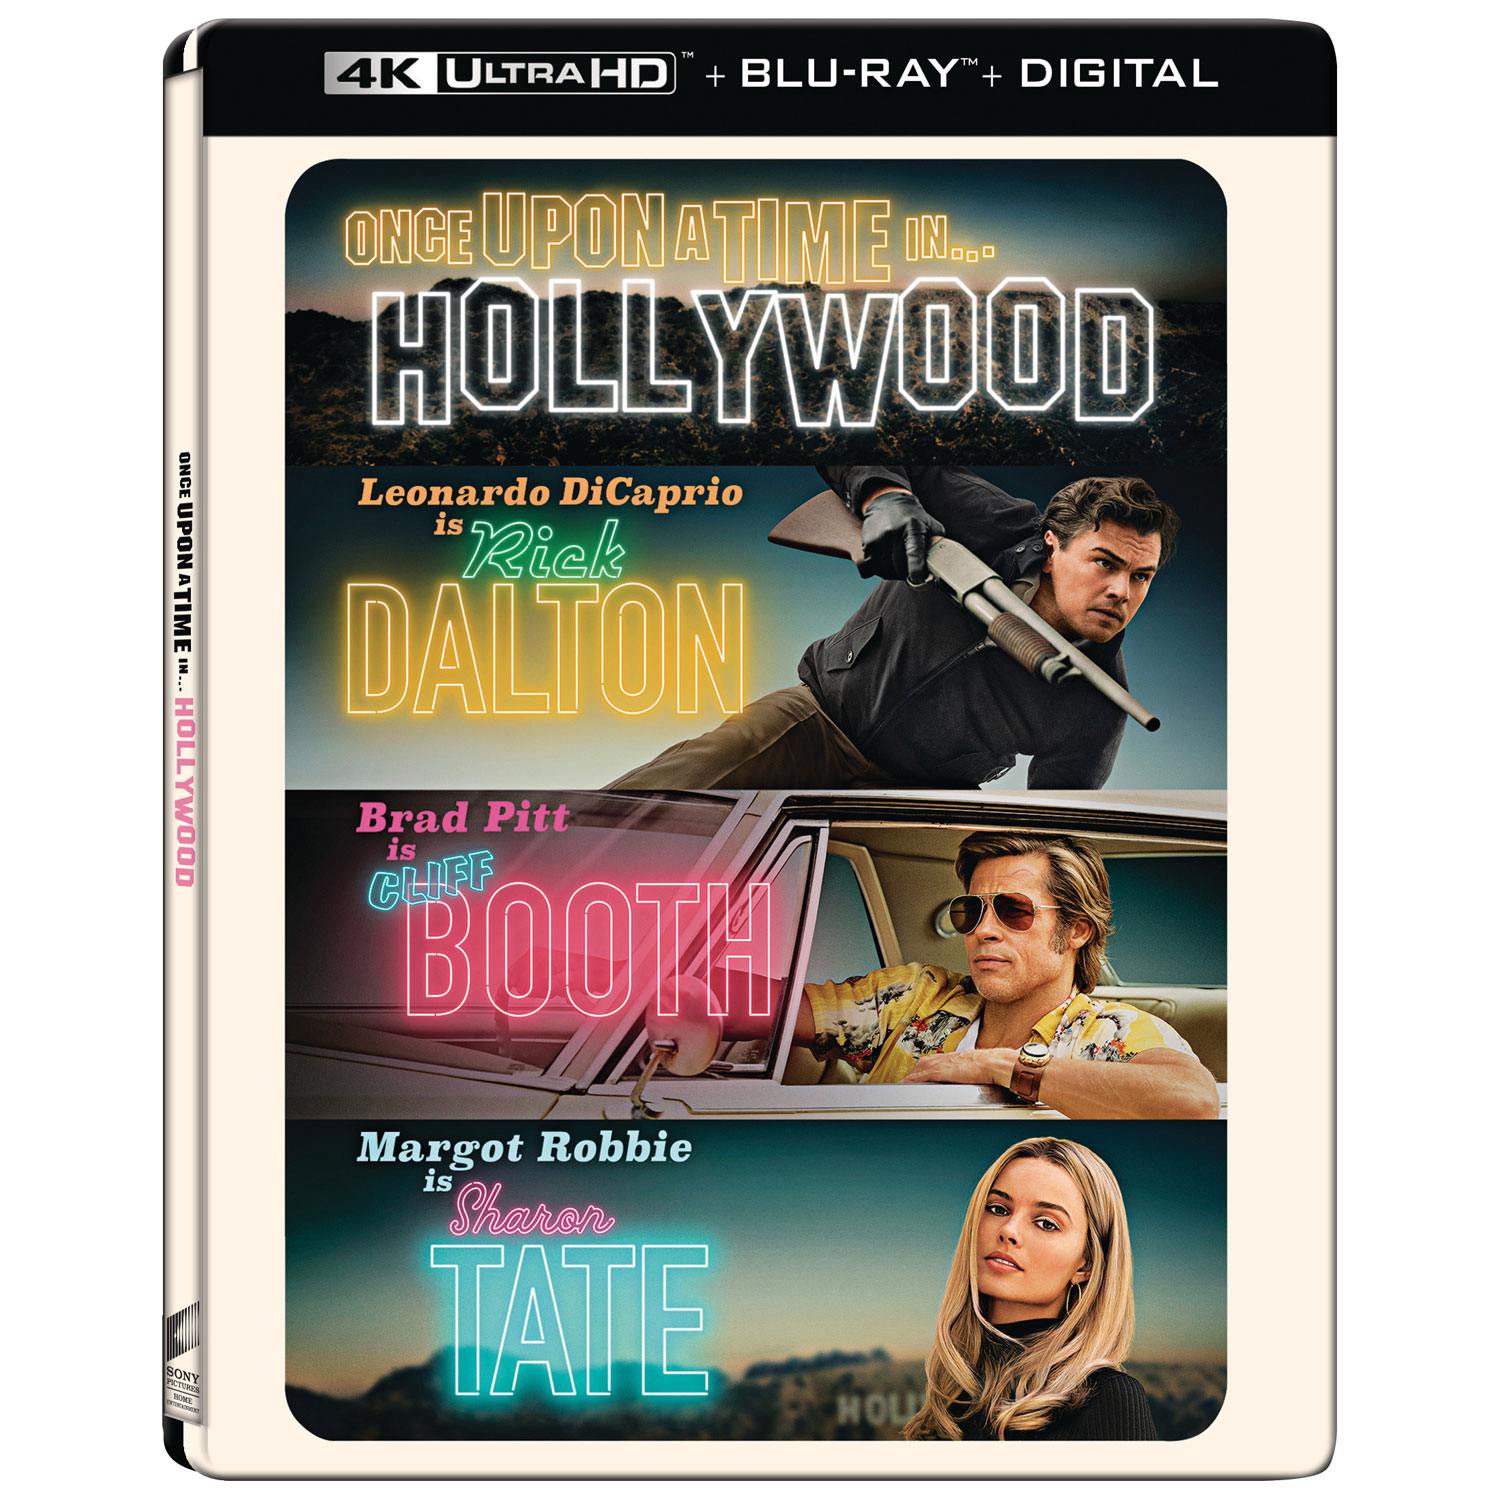 Once Upon A Time In Hollywood (Steelbook) (4K Ultra HD) (Blu-ray Combo)